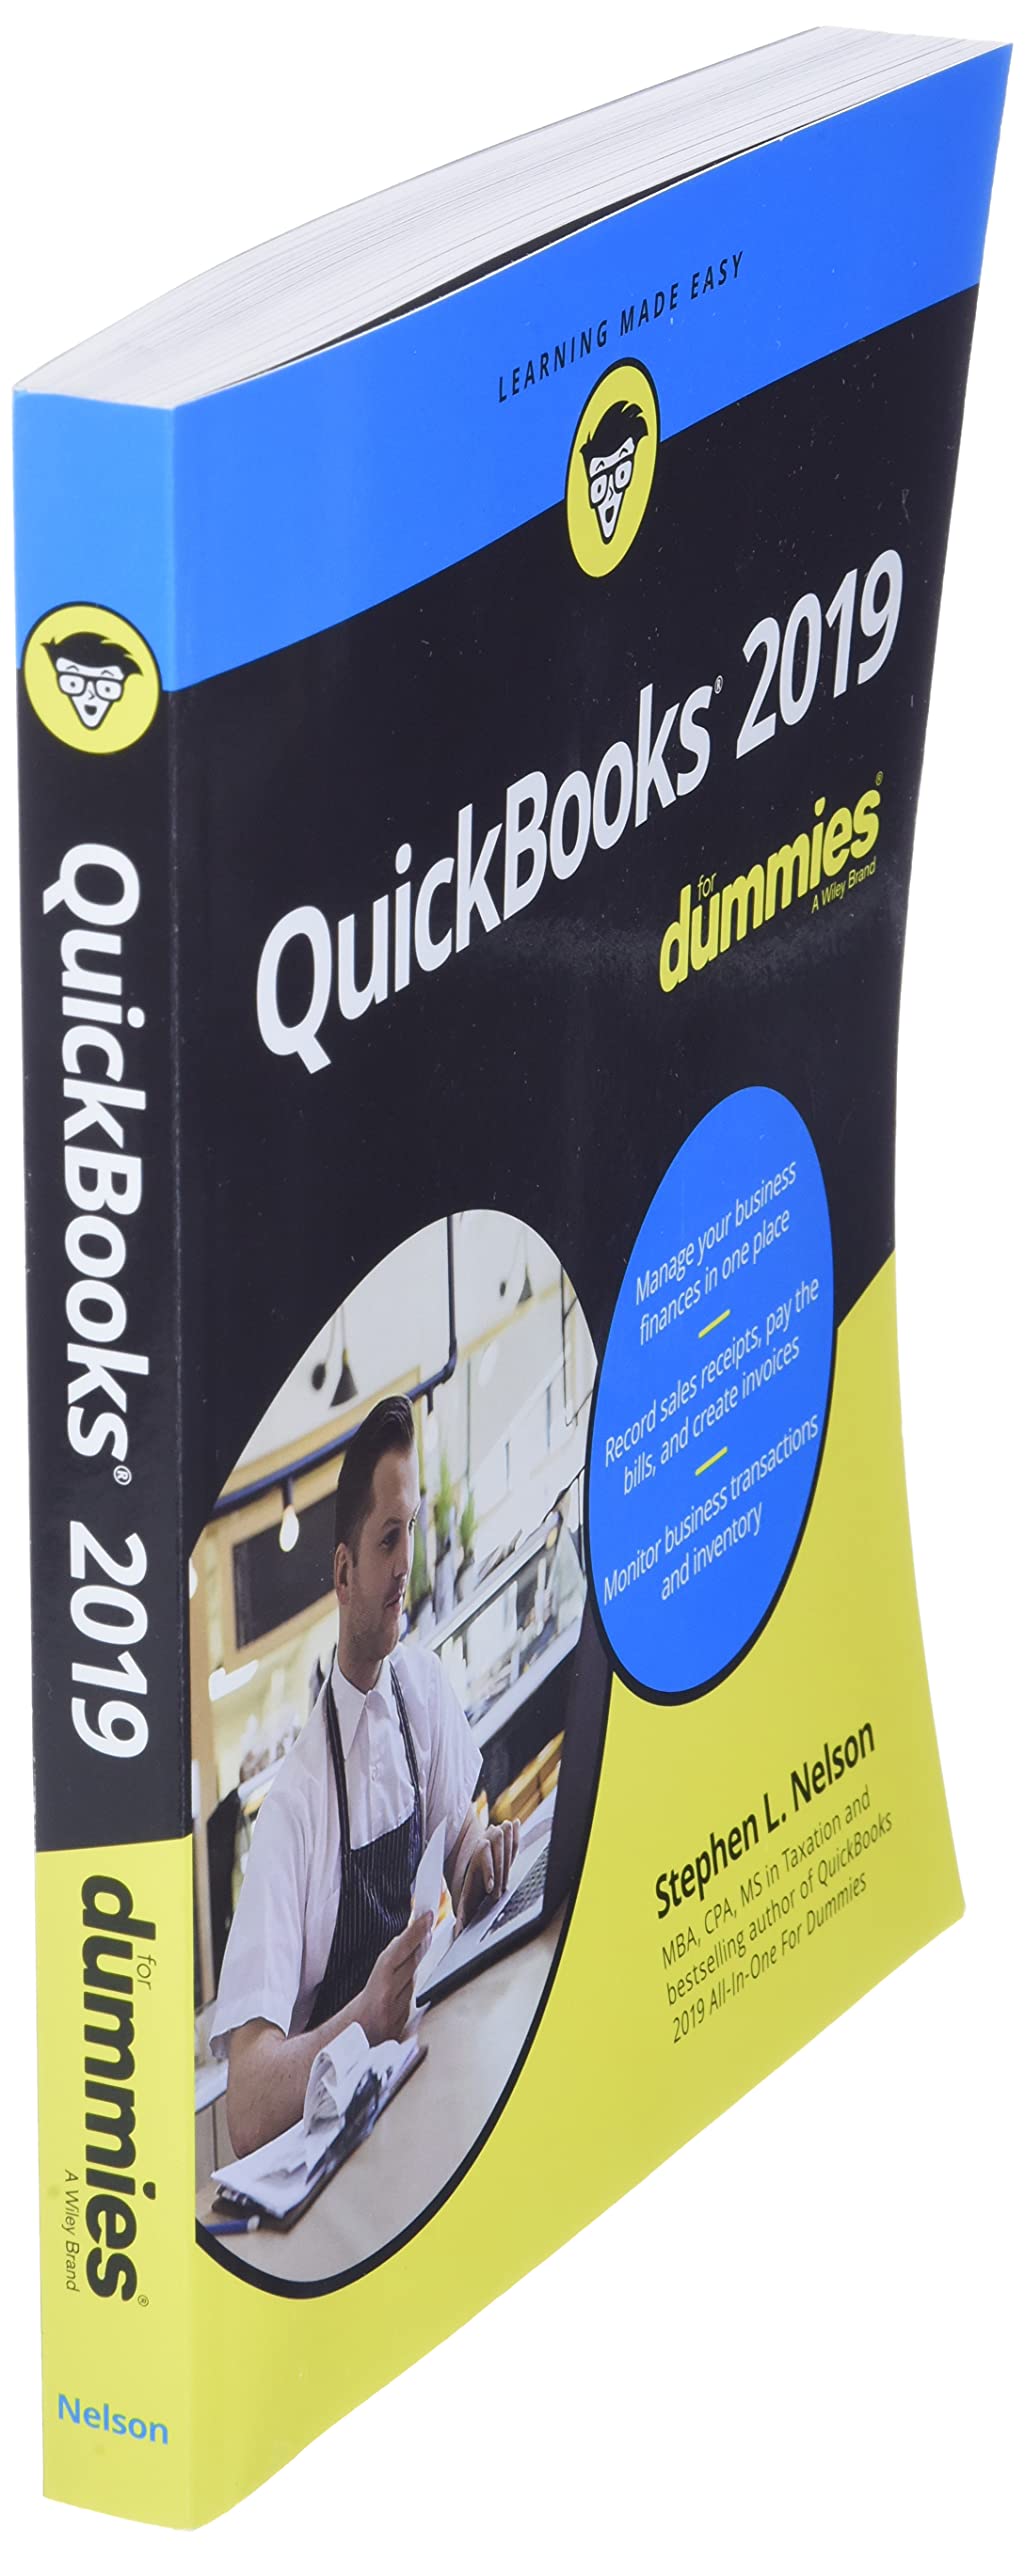 QuickBooks 2019 For Dummies (For Dummies (Computer/Tech))